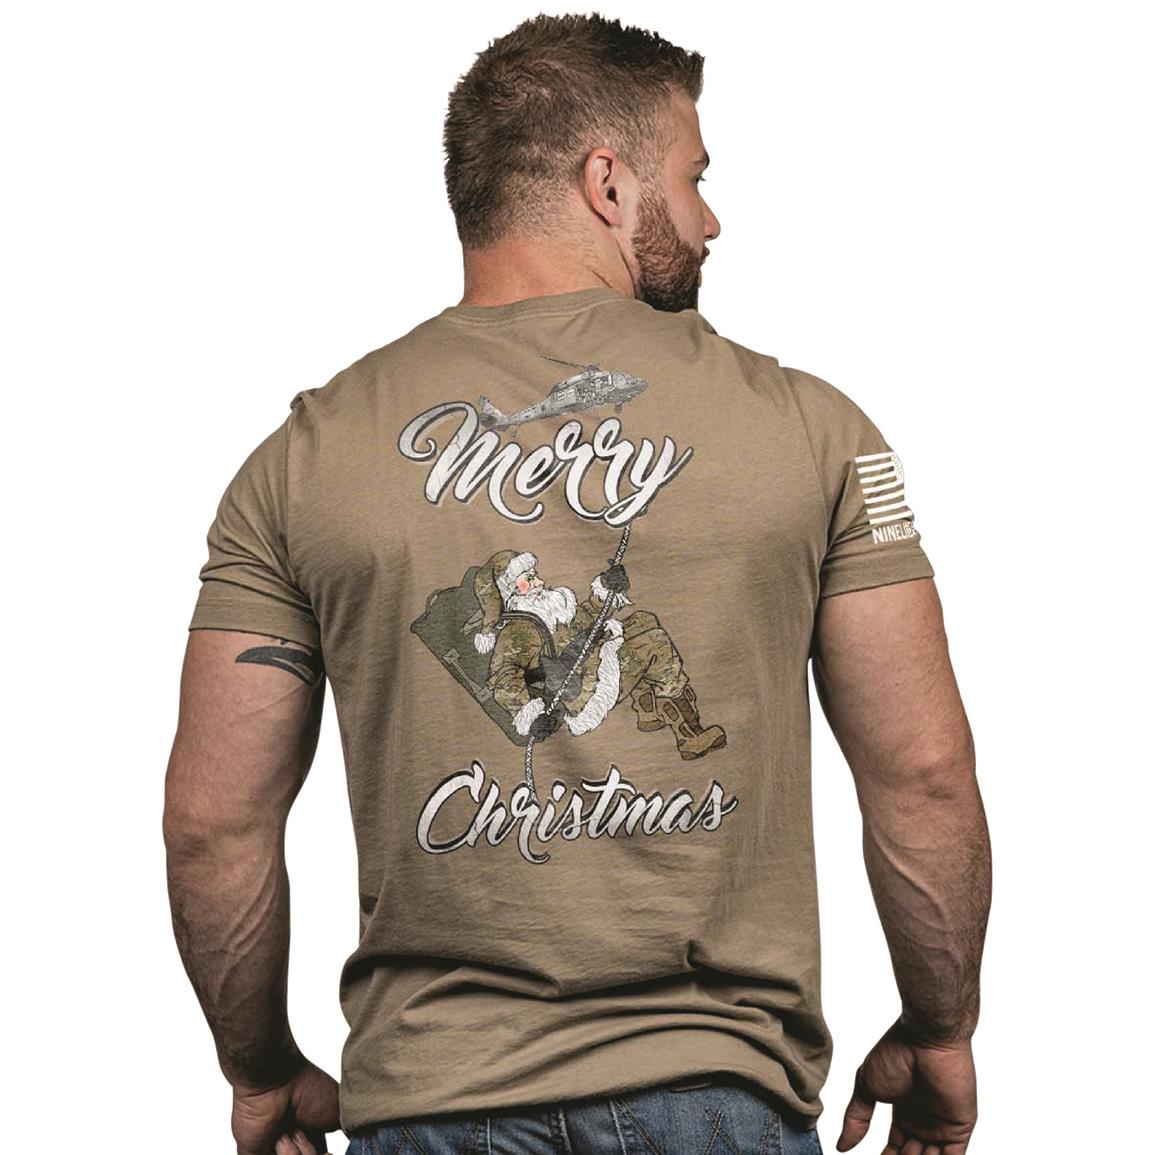 Screen-printed Tactical Santa graphic on back, Coyote